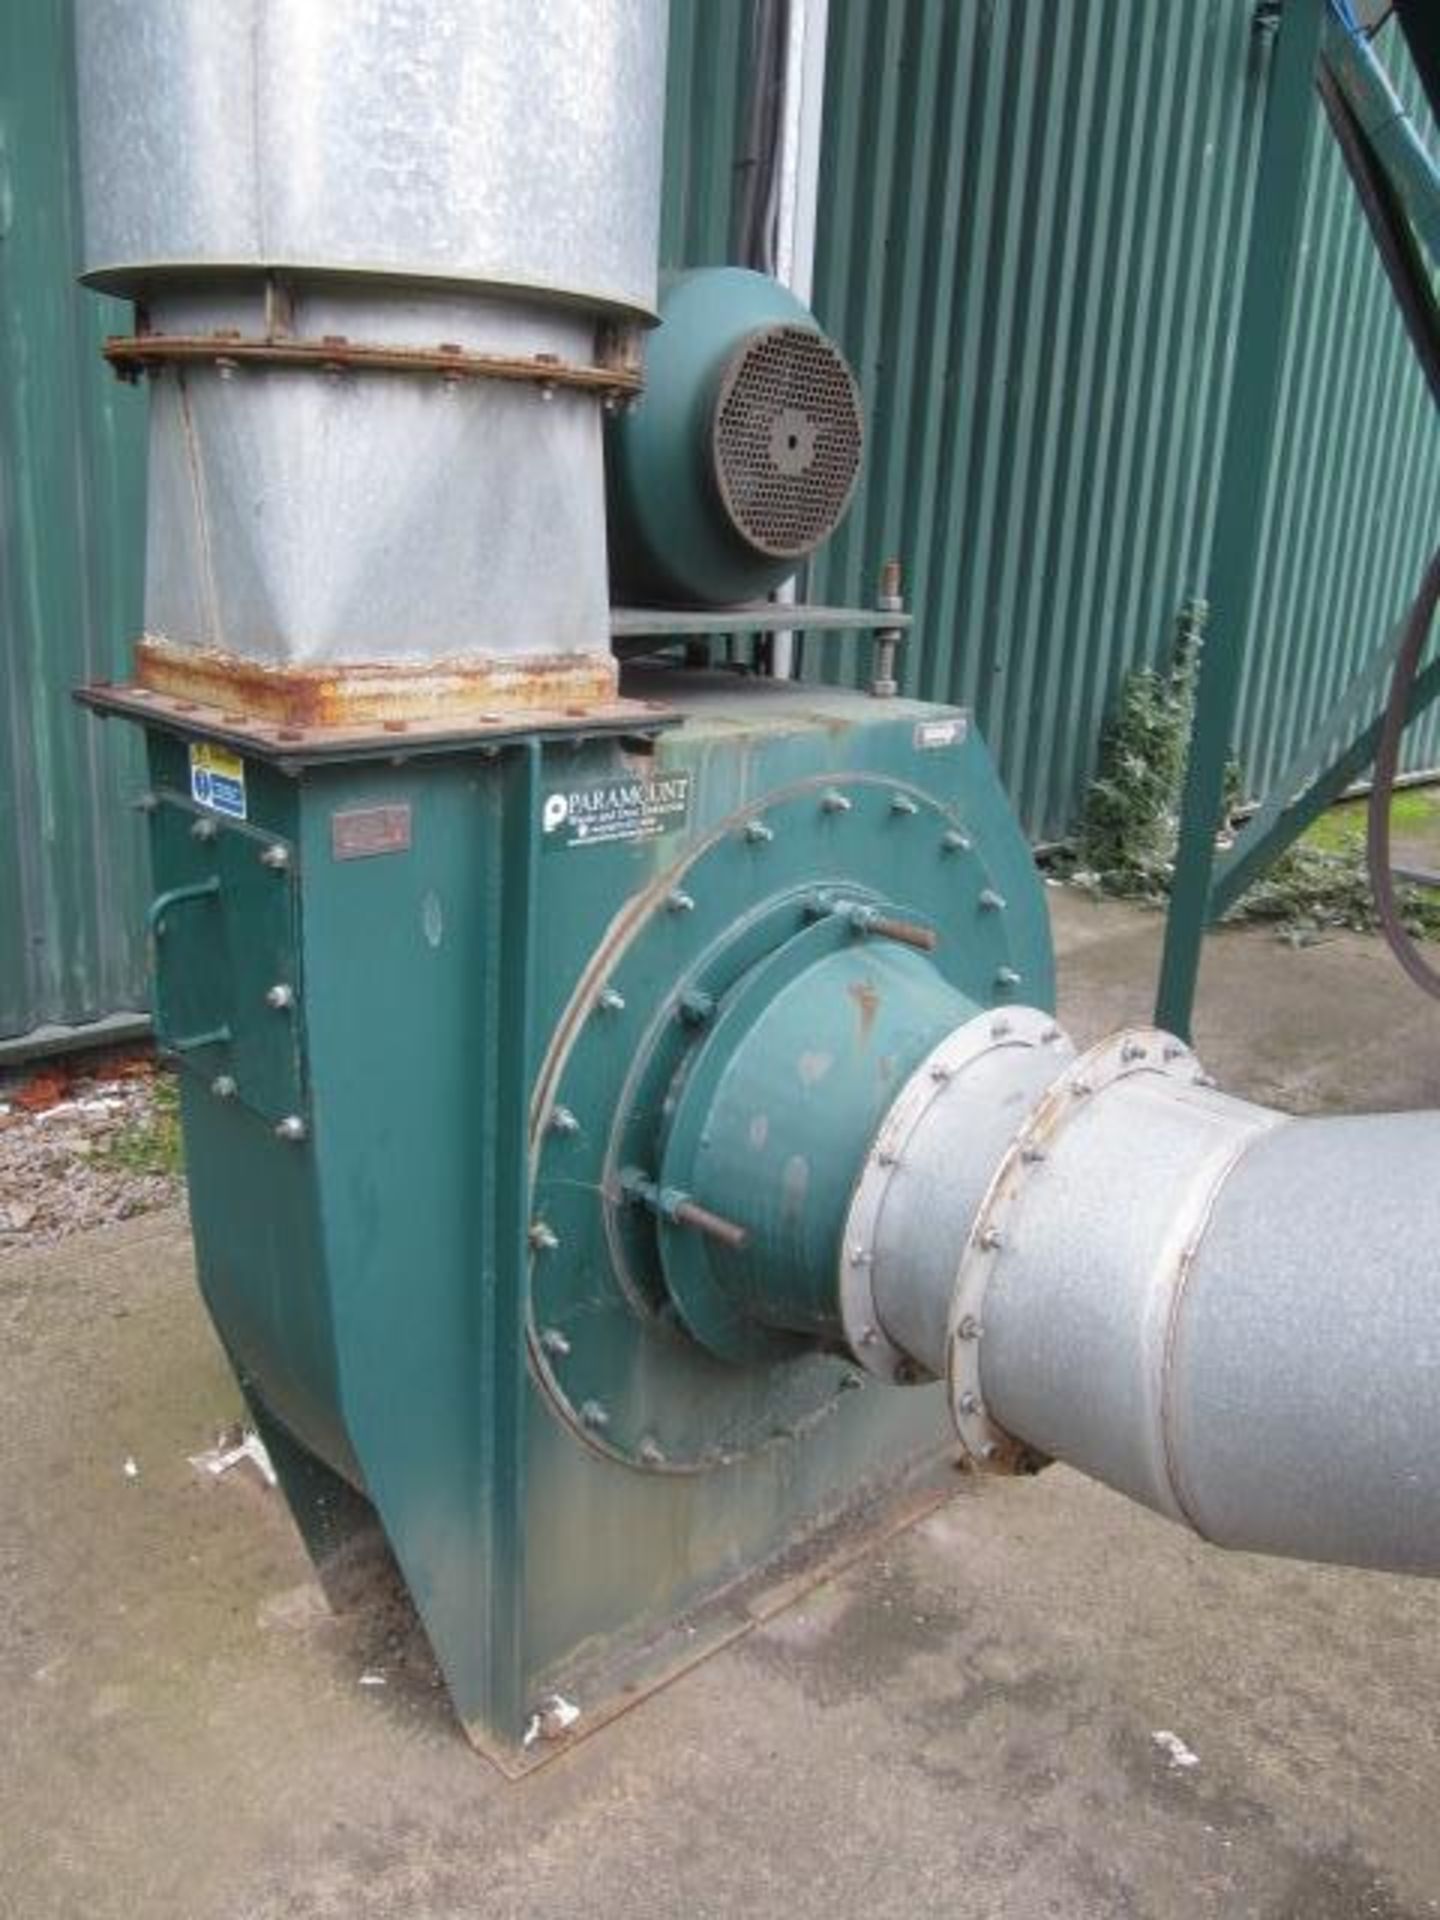 Paramount waste & dust extraction system and compactor to include: - Paramount motorised - Image 10 of 11